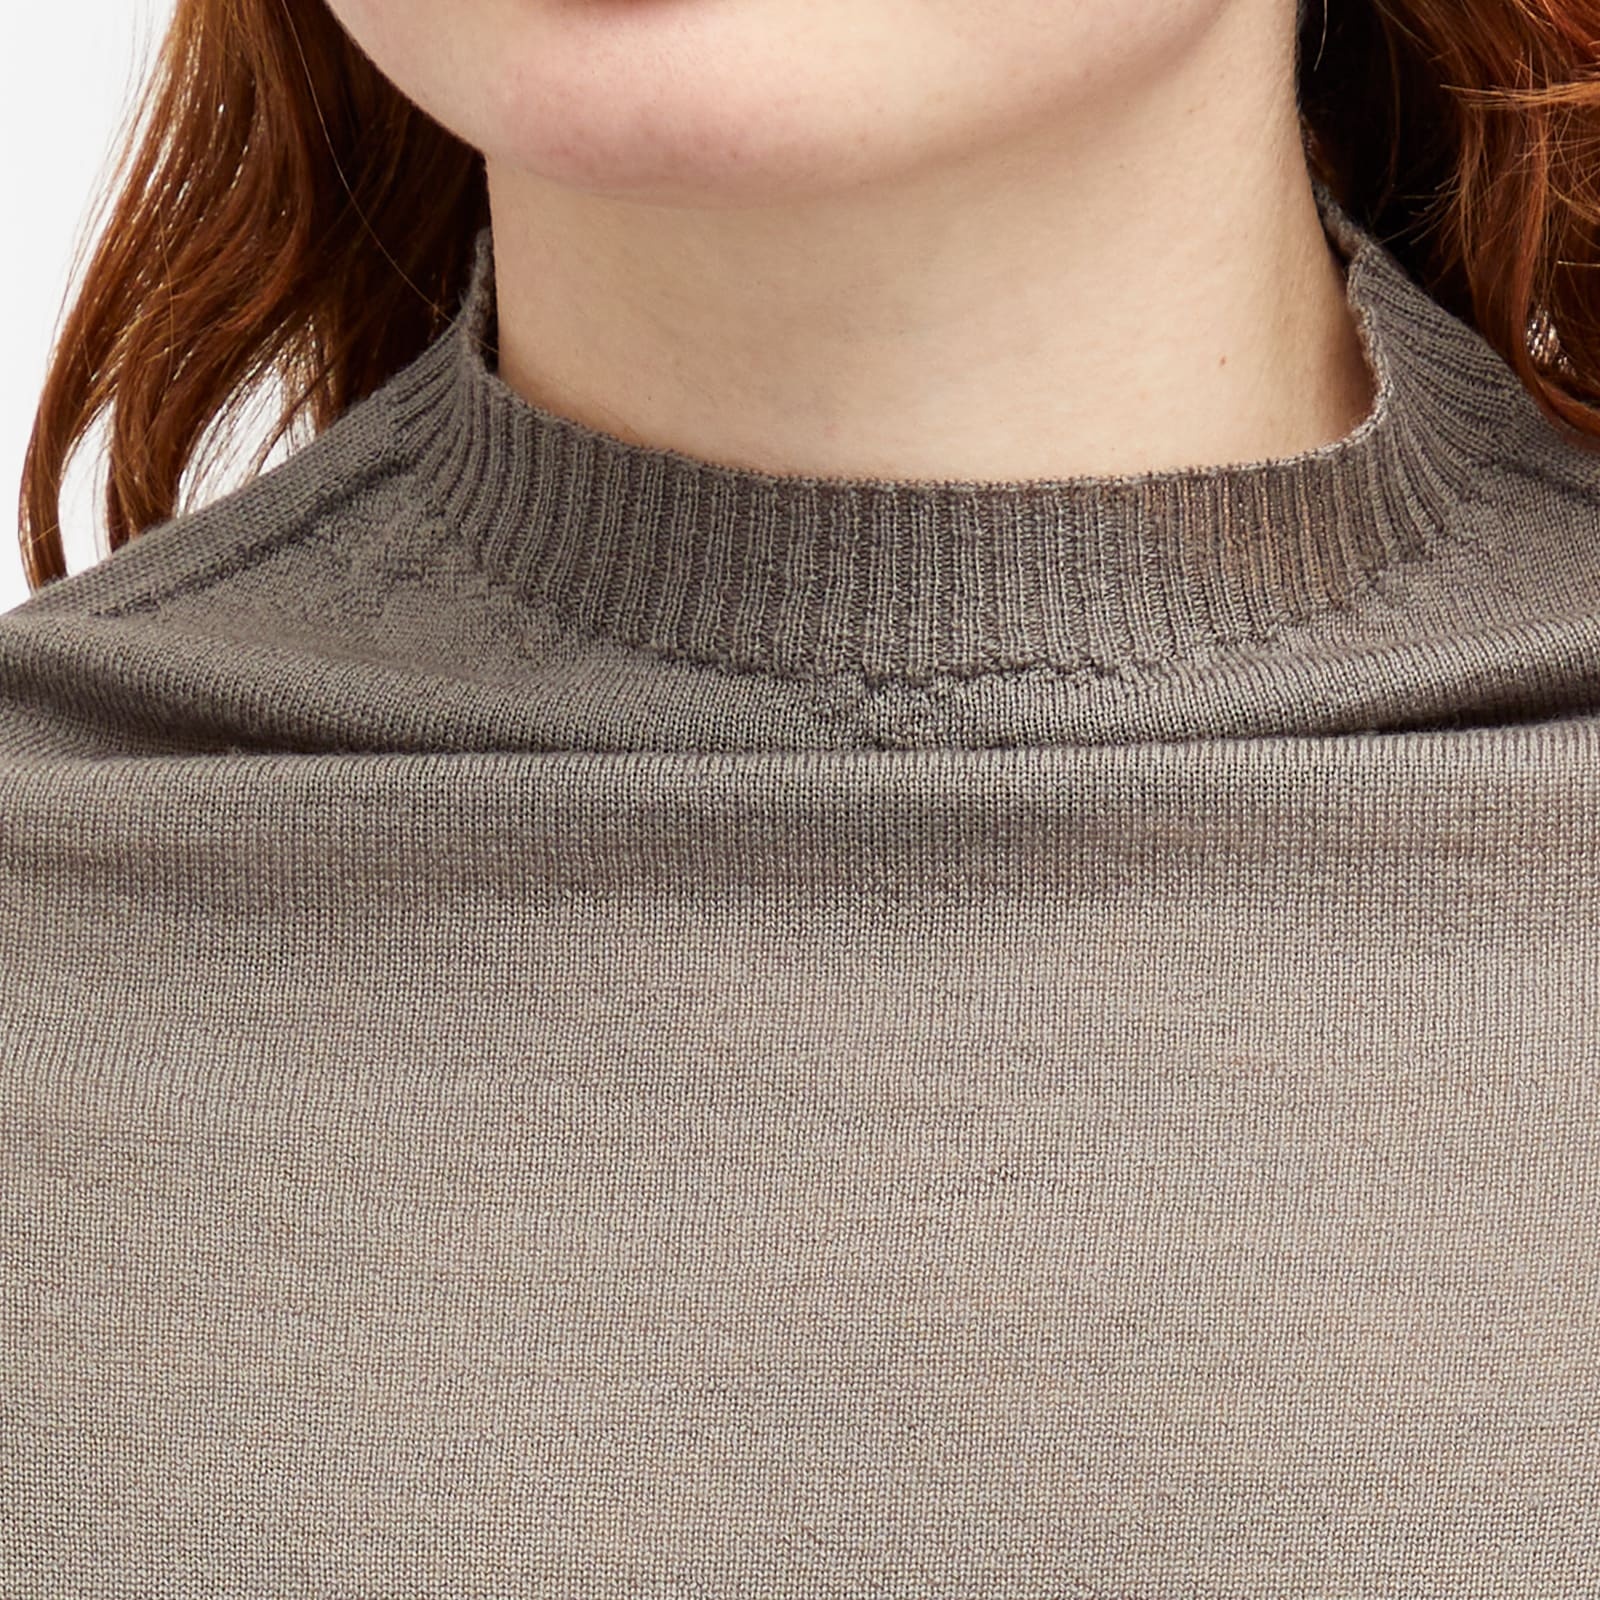 Rick Owens Crater Knit Top - 5